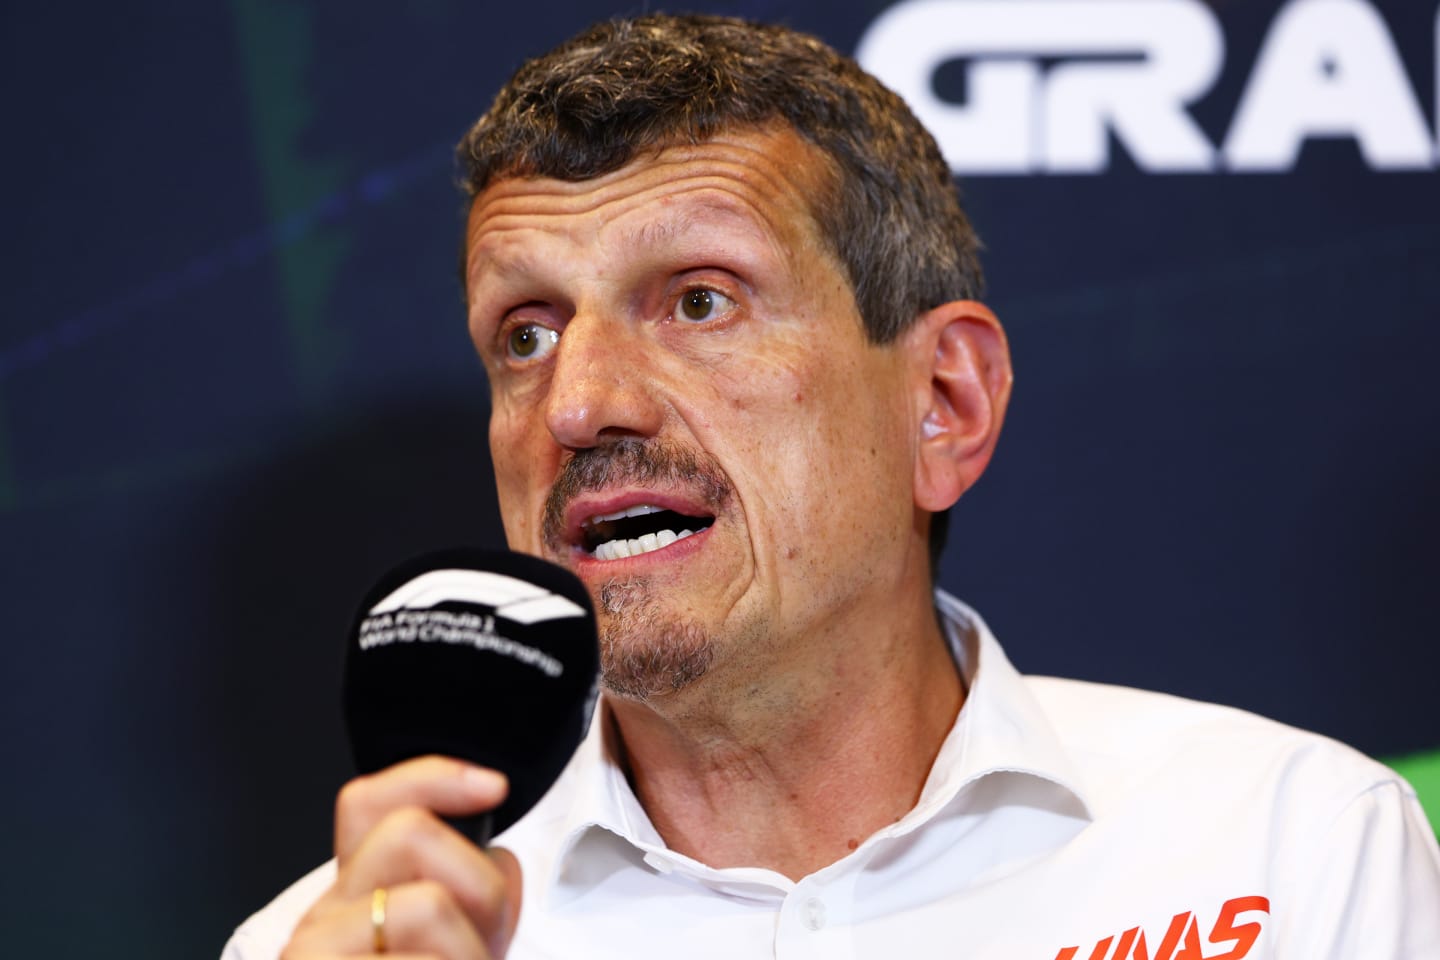 BAKU, AZERBAIJAN - JUNE 11: Haas F1 Team Principal Guenther Steiner talks in the Team Principals Press Conference prior to final practice ahead of the F1 Grand Prix of Azerbaijan at Baku City Circuit on June 11, 2022 in Baku, Azerbaijan. (Photo by Clive Rose/Getty Images)